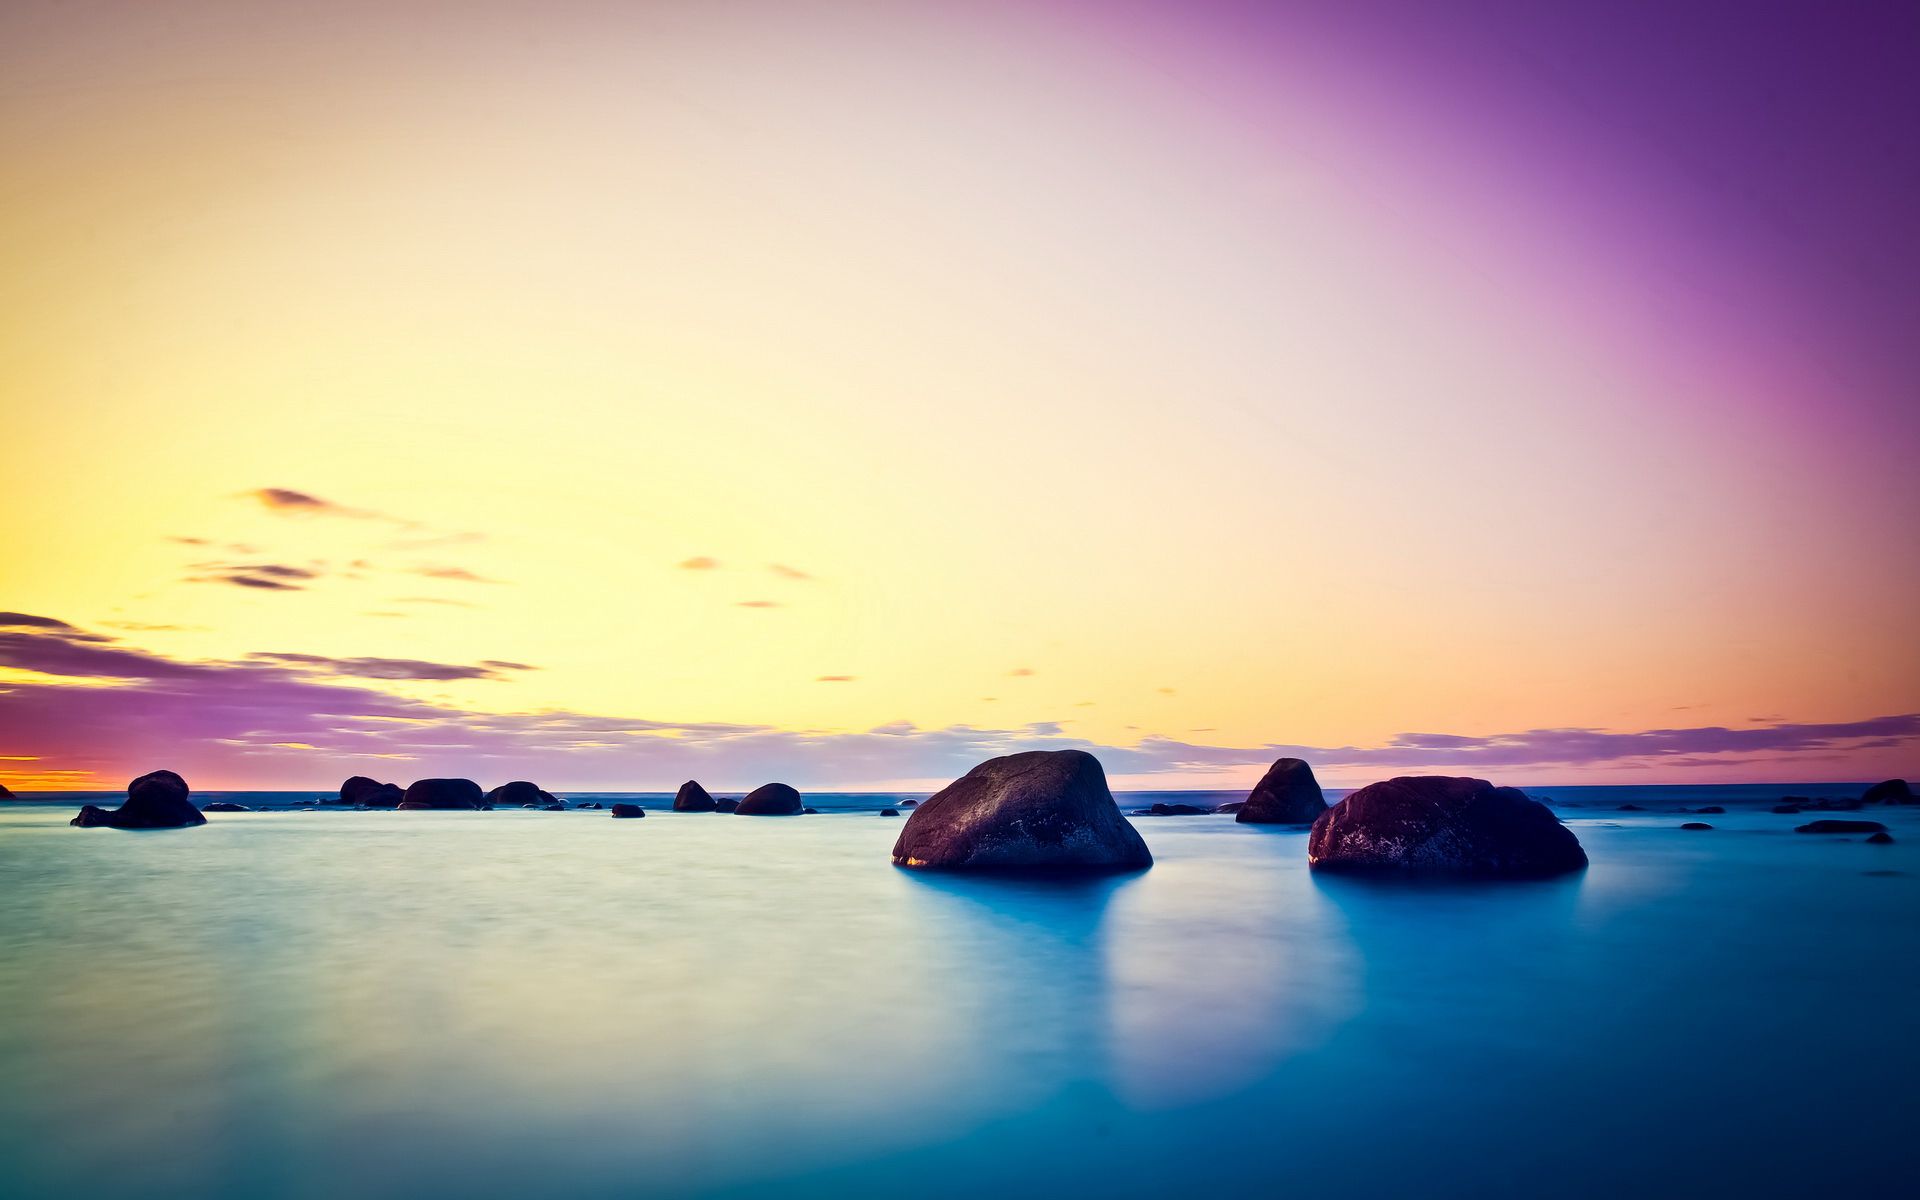  Peaceful Wallpapers Widescreen Long Wallpapers   Cool Calm 1920x1200